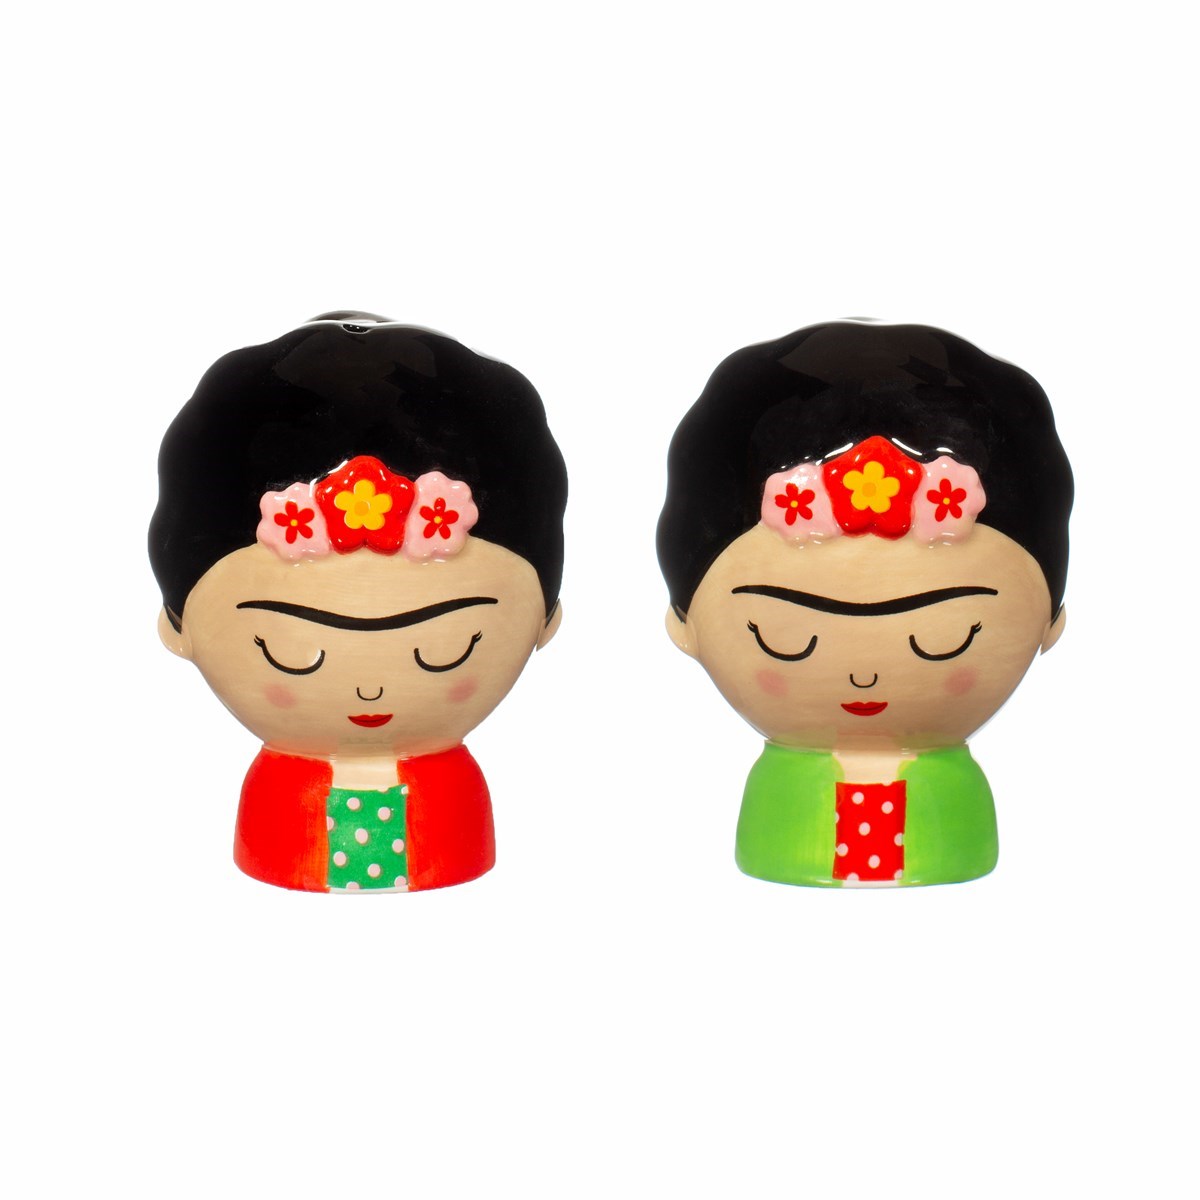 Sass and Belle Frida Kahlo Salt and Pepper Shakers at Home and Bay